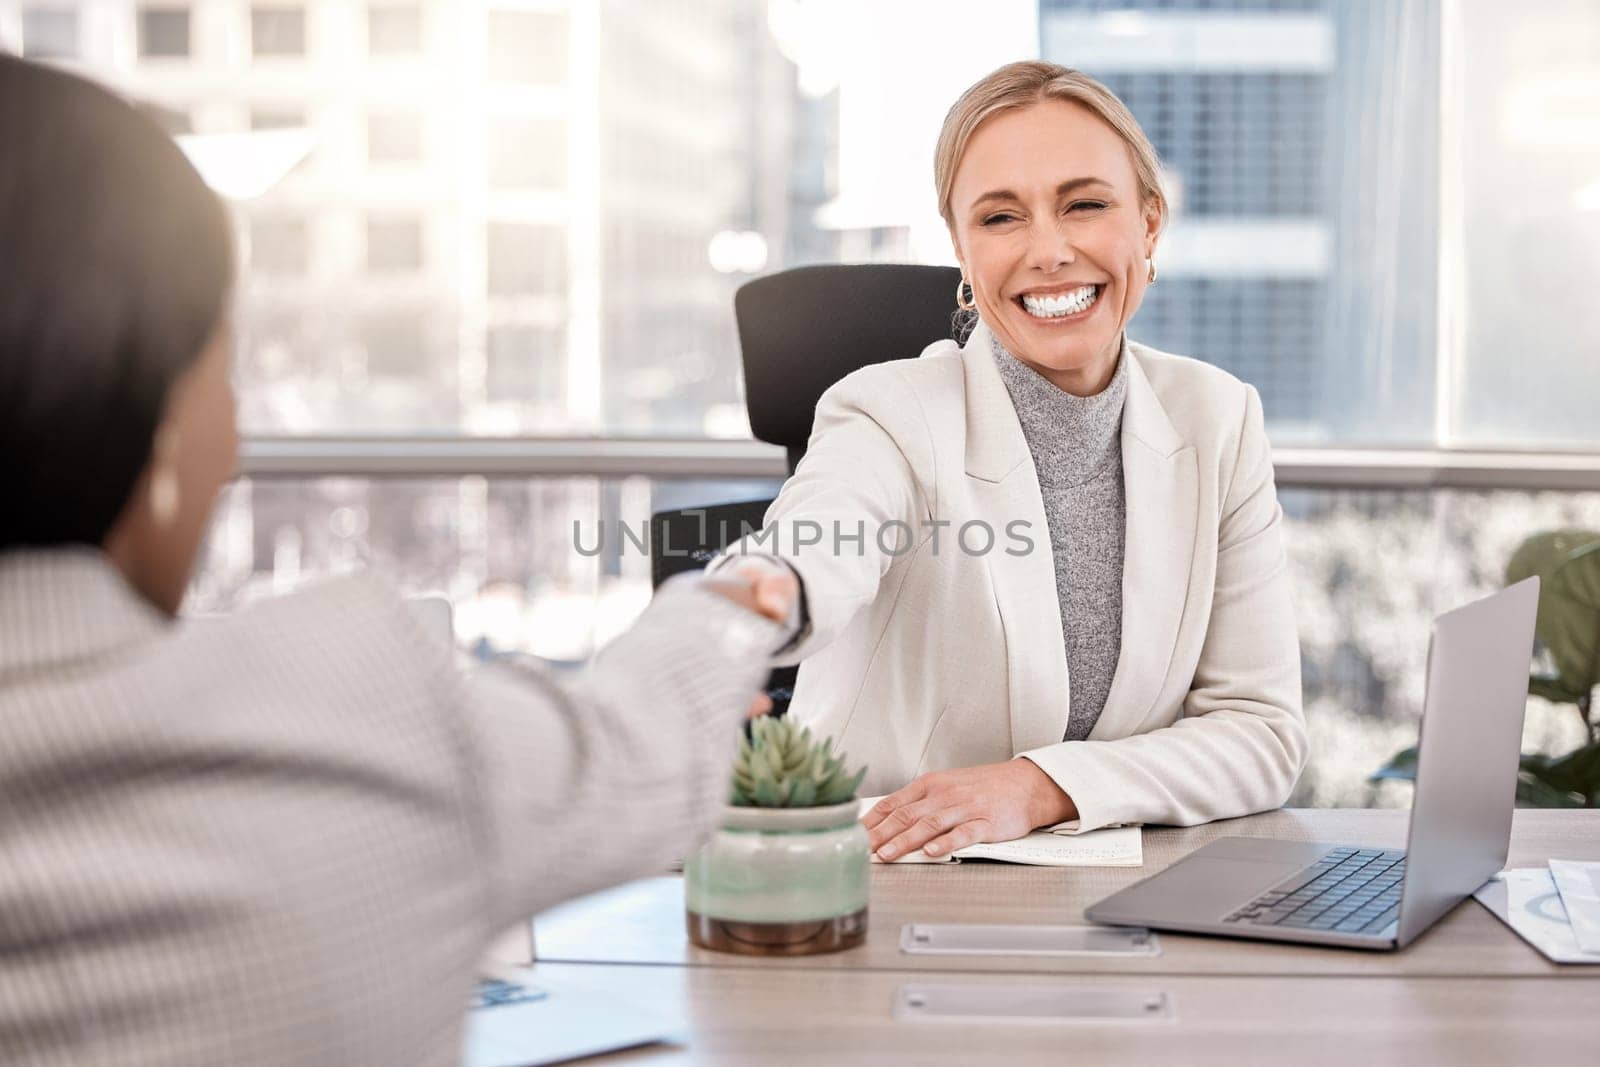 Smile, businesswoman and shake hands or interview for new job or hired and in the office. Partnership, human resource and female worker meeting or staff agreement or approve and team in the workplace.